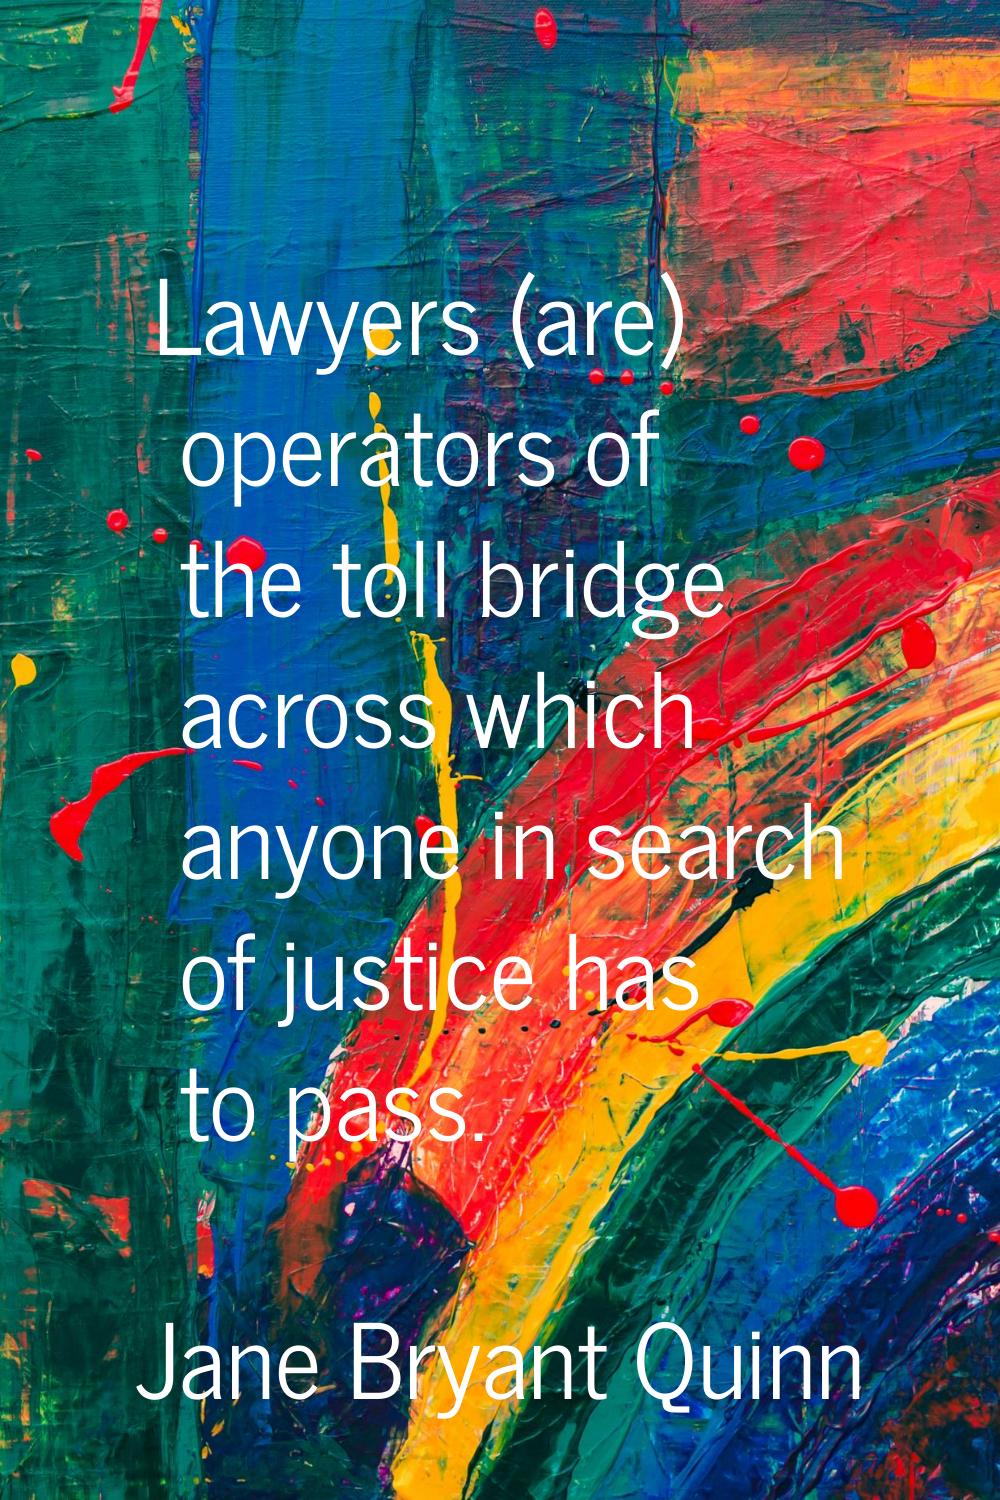 Lawyers (are) operators of the toll bridge across which anyone in search of justice has to pass.